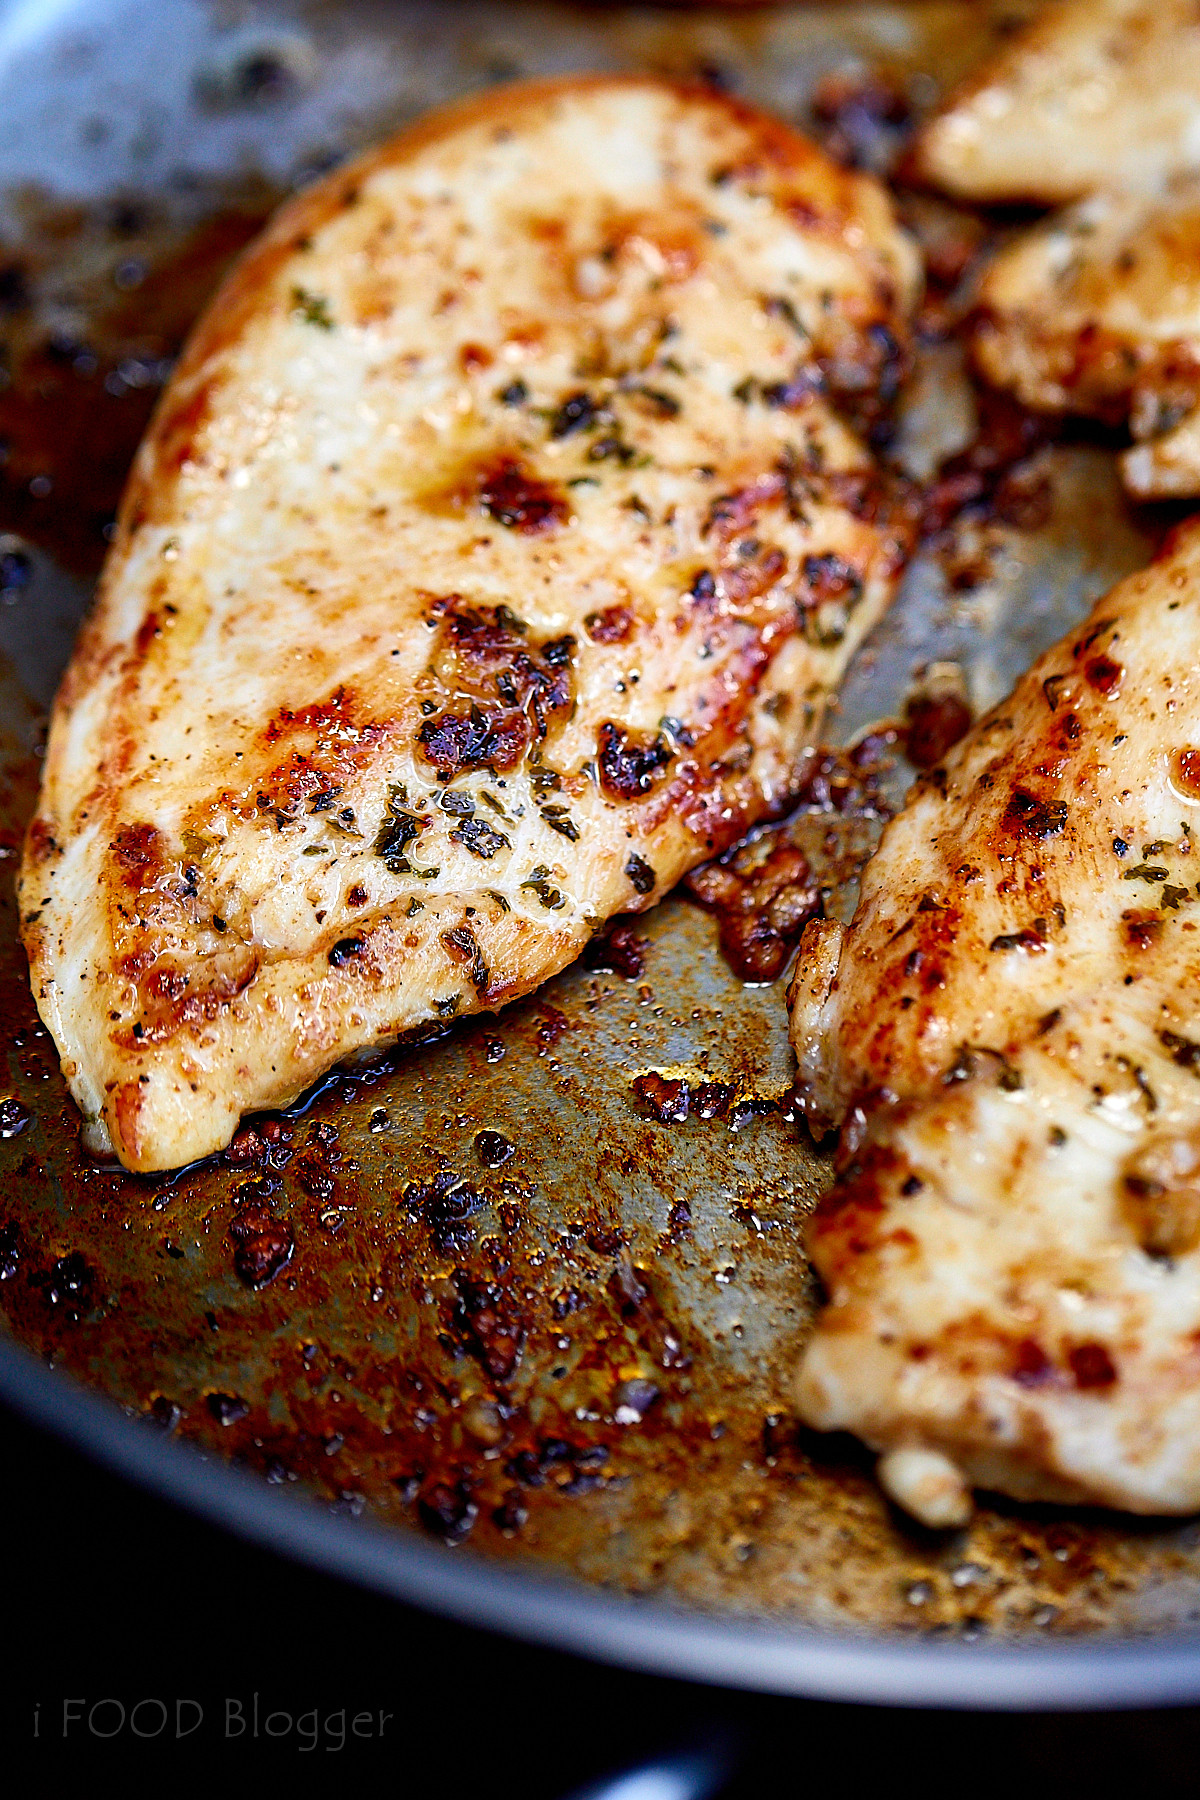 Pan Fried Chicken Breasts Recipe
 10 Minute Pan Fried Chicken Breast i FOOD Blogger